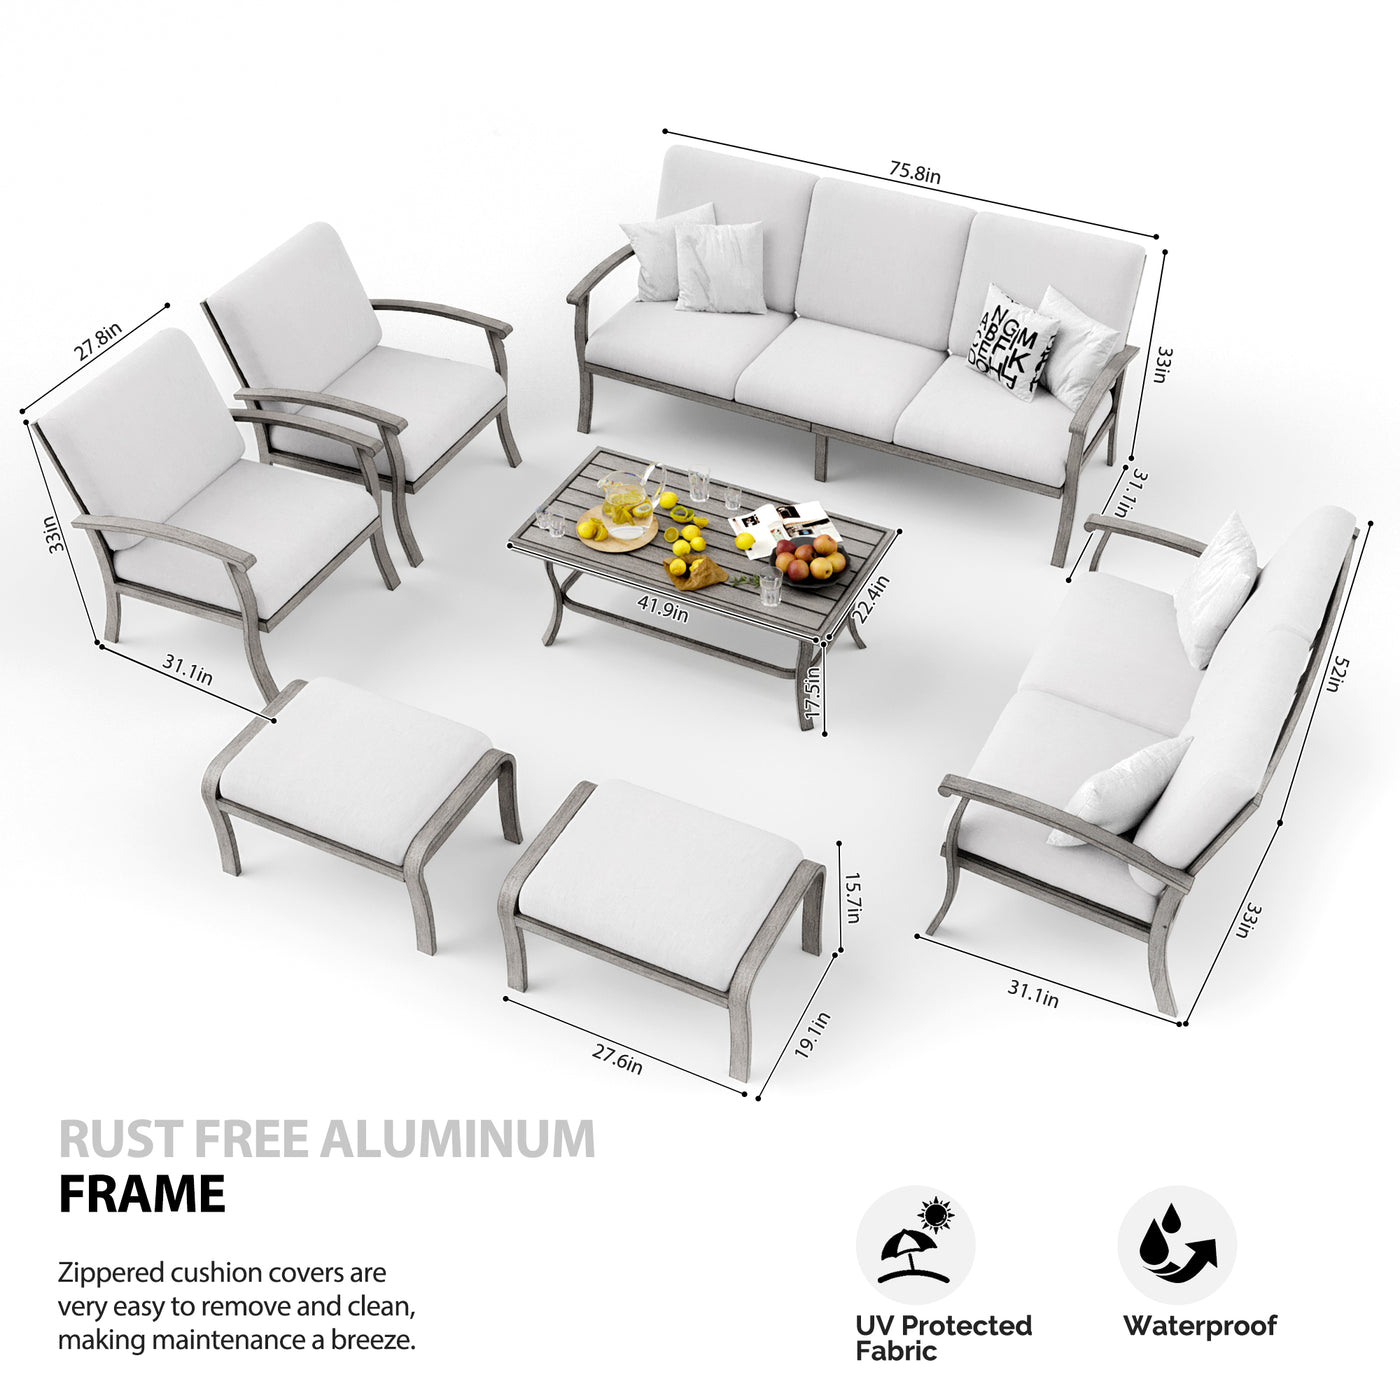 HAPPATIO 7 Piece Aluminum Patio Furniture Set, 3-Seat Outdoor Ottomans and Armchairs, All-Weather Outdoor Sectional Sofa with Side Table and Coffee Table, Garden Conversation Set for Lawn Deck (Gray)